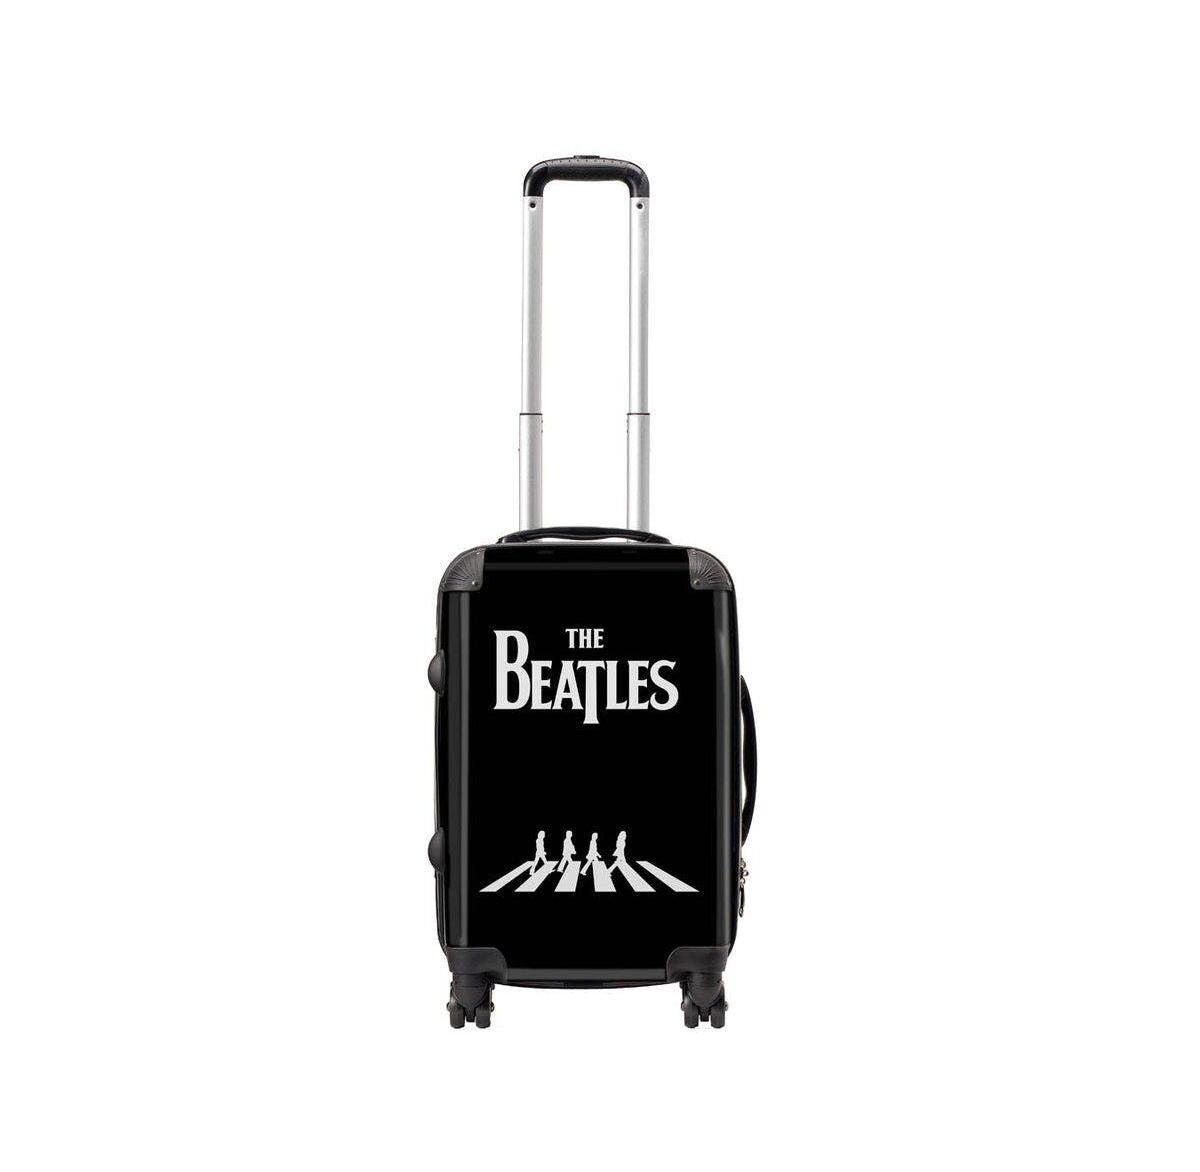 Rocksax The Beatles Tour Series Luggage - Abbey Road B/W - Small - Carry On - Multi-colored